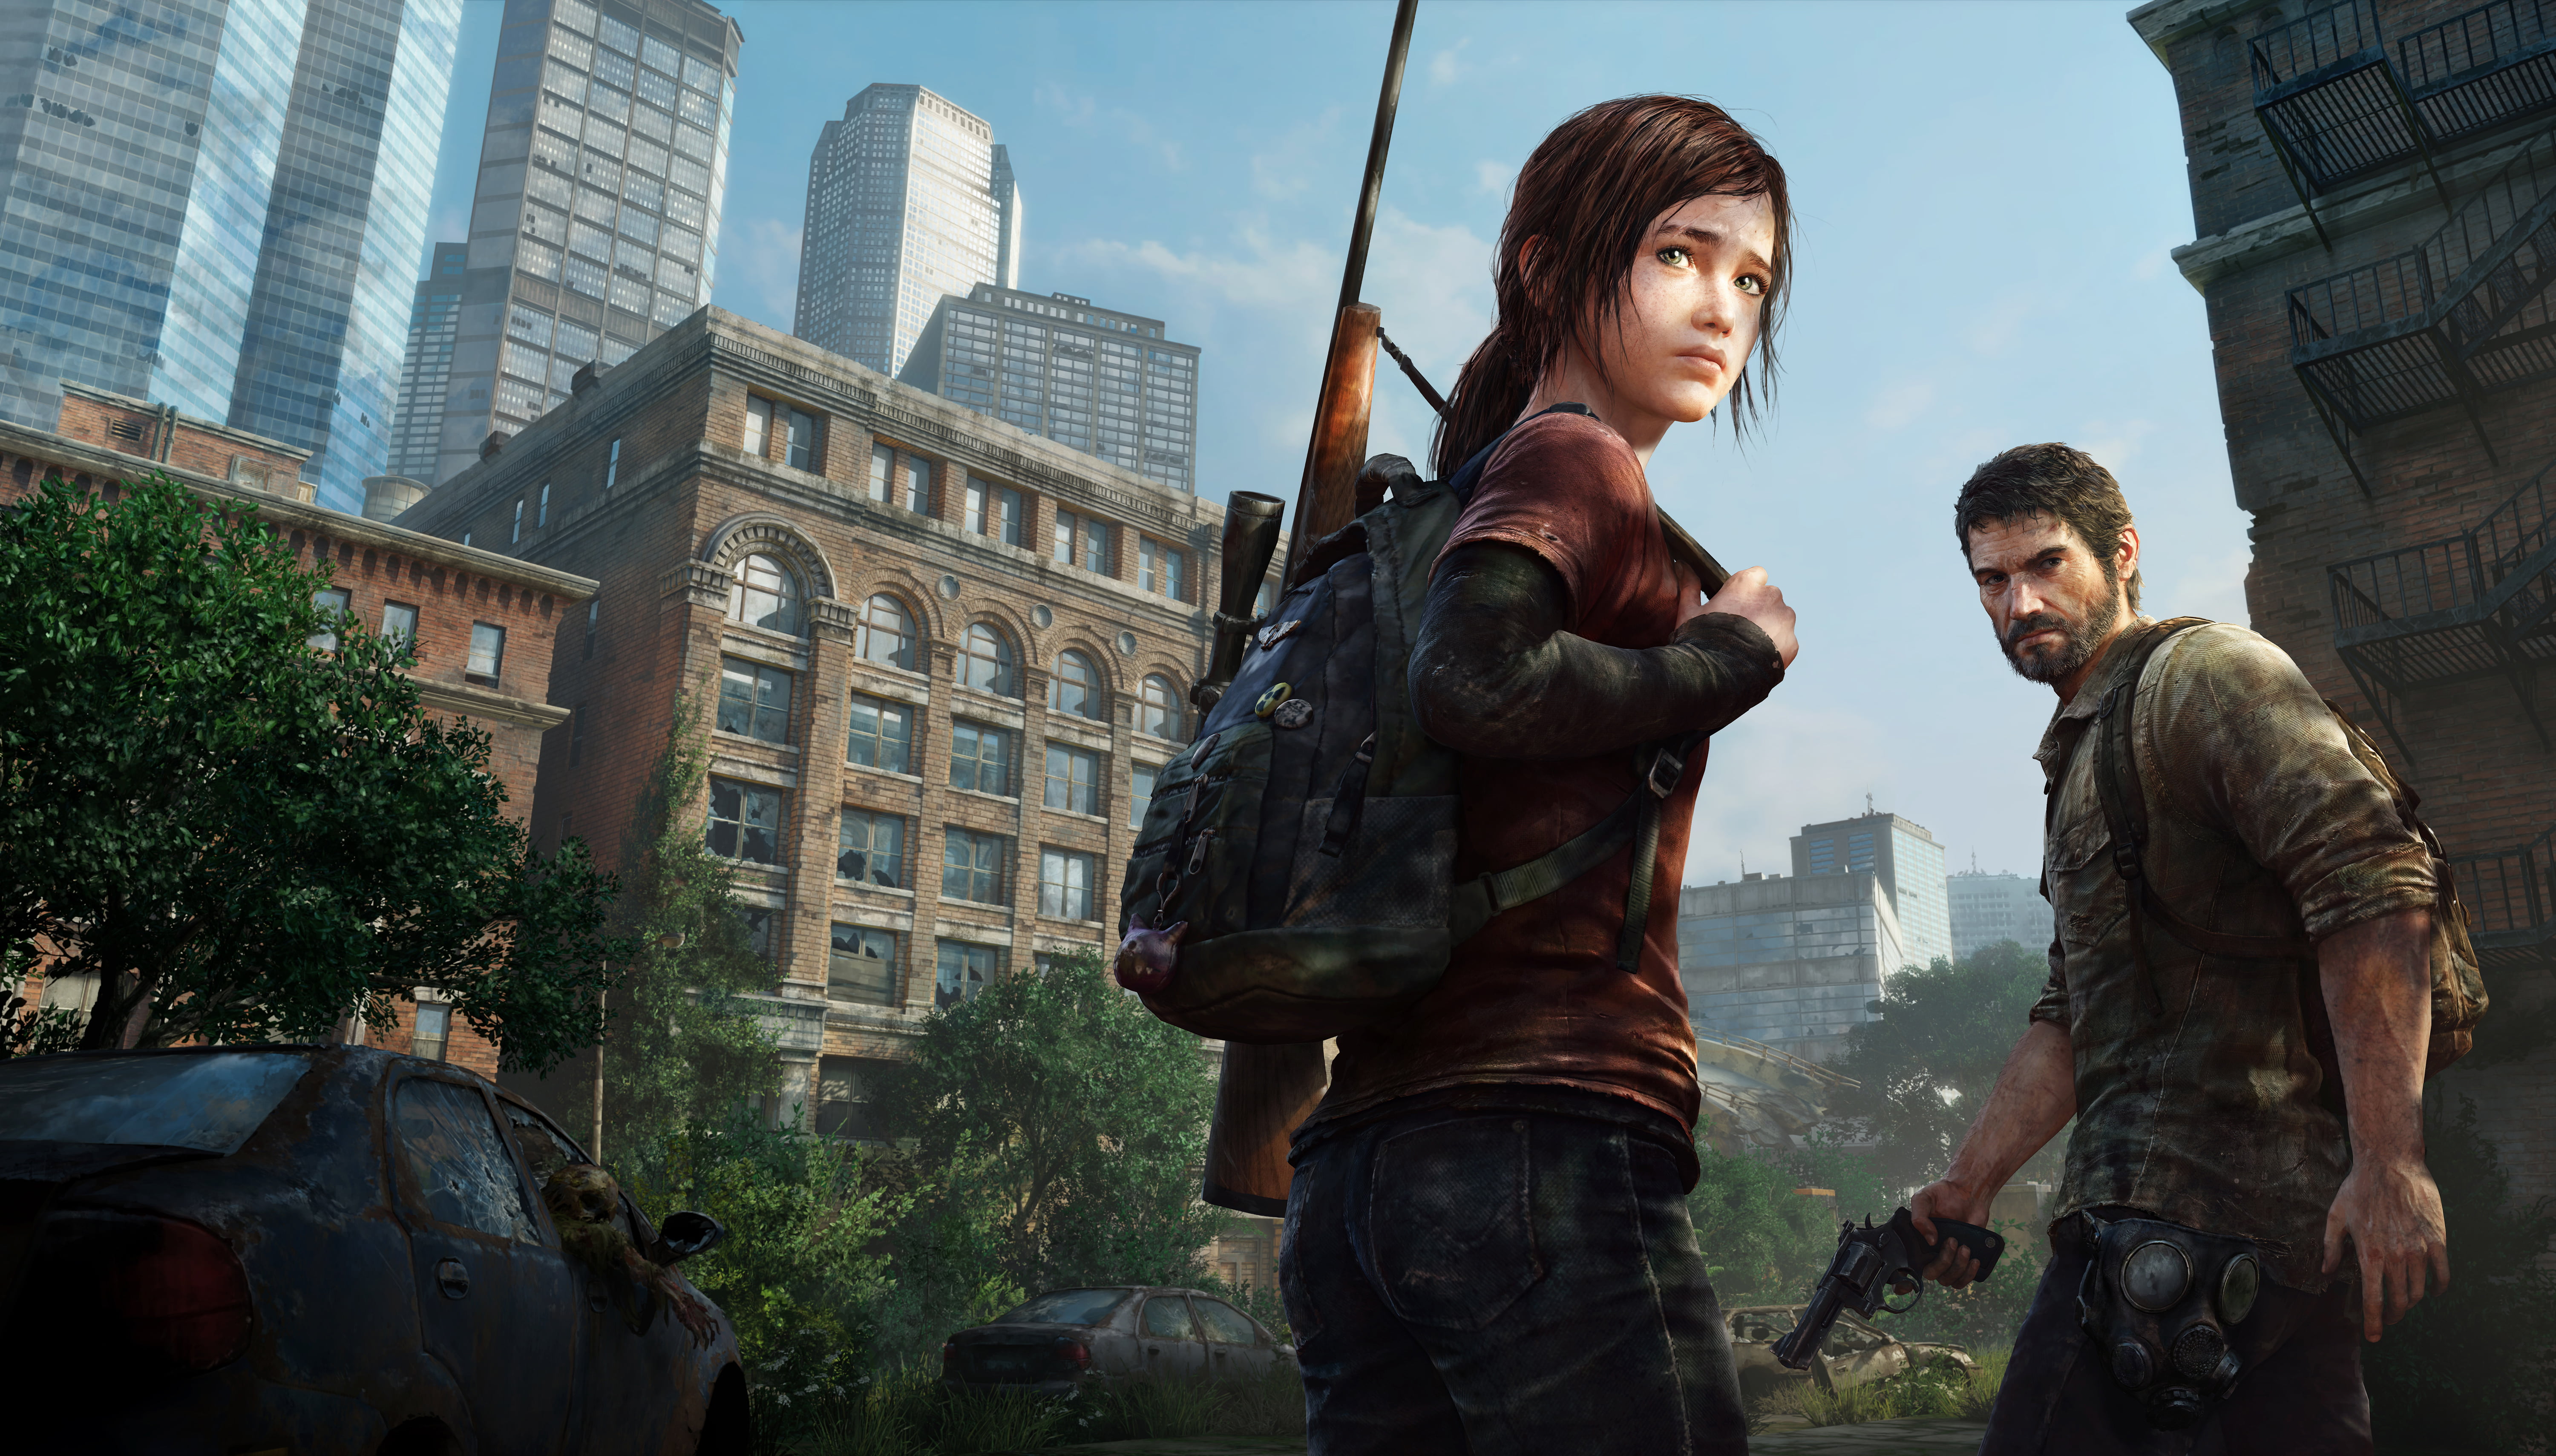 The game may not be. The last of us. The last of us игра. Джоэл и Элли. Одни из нас (the last of us) ps4.